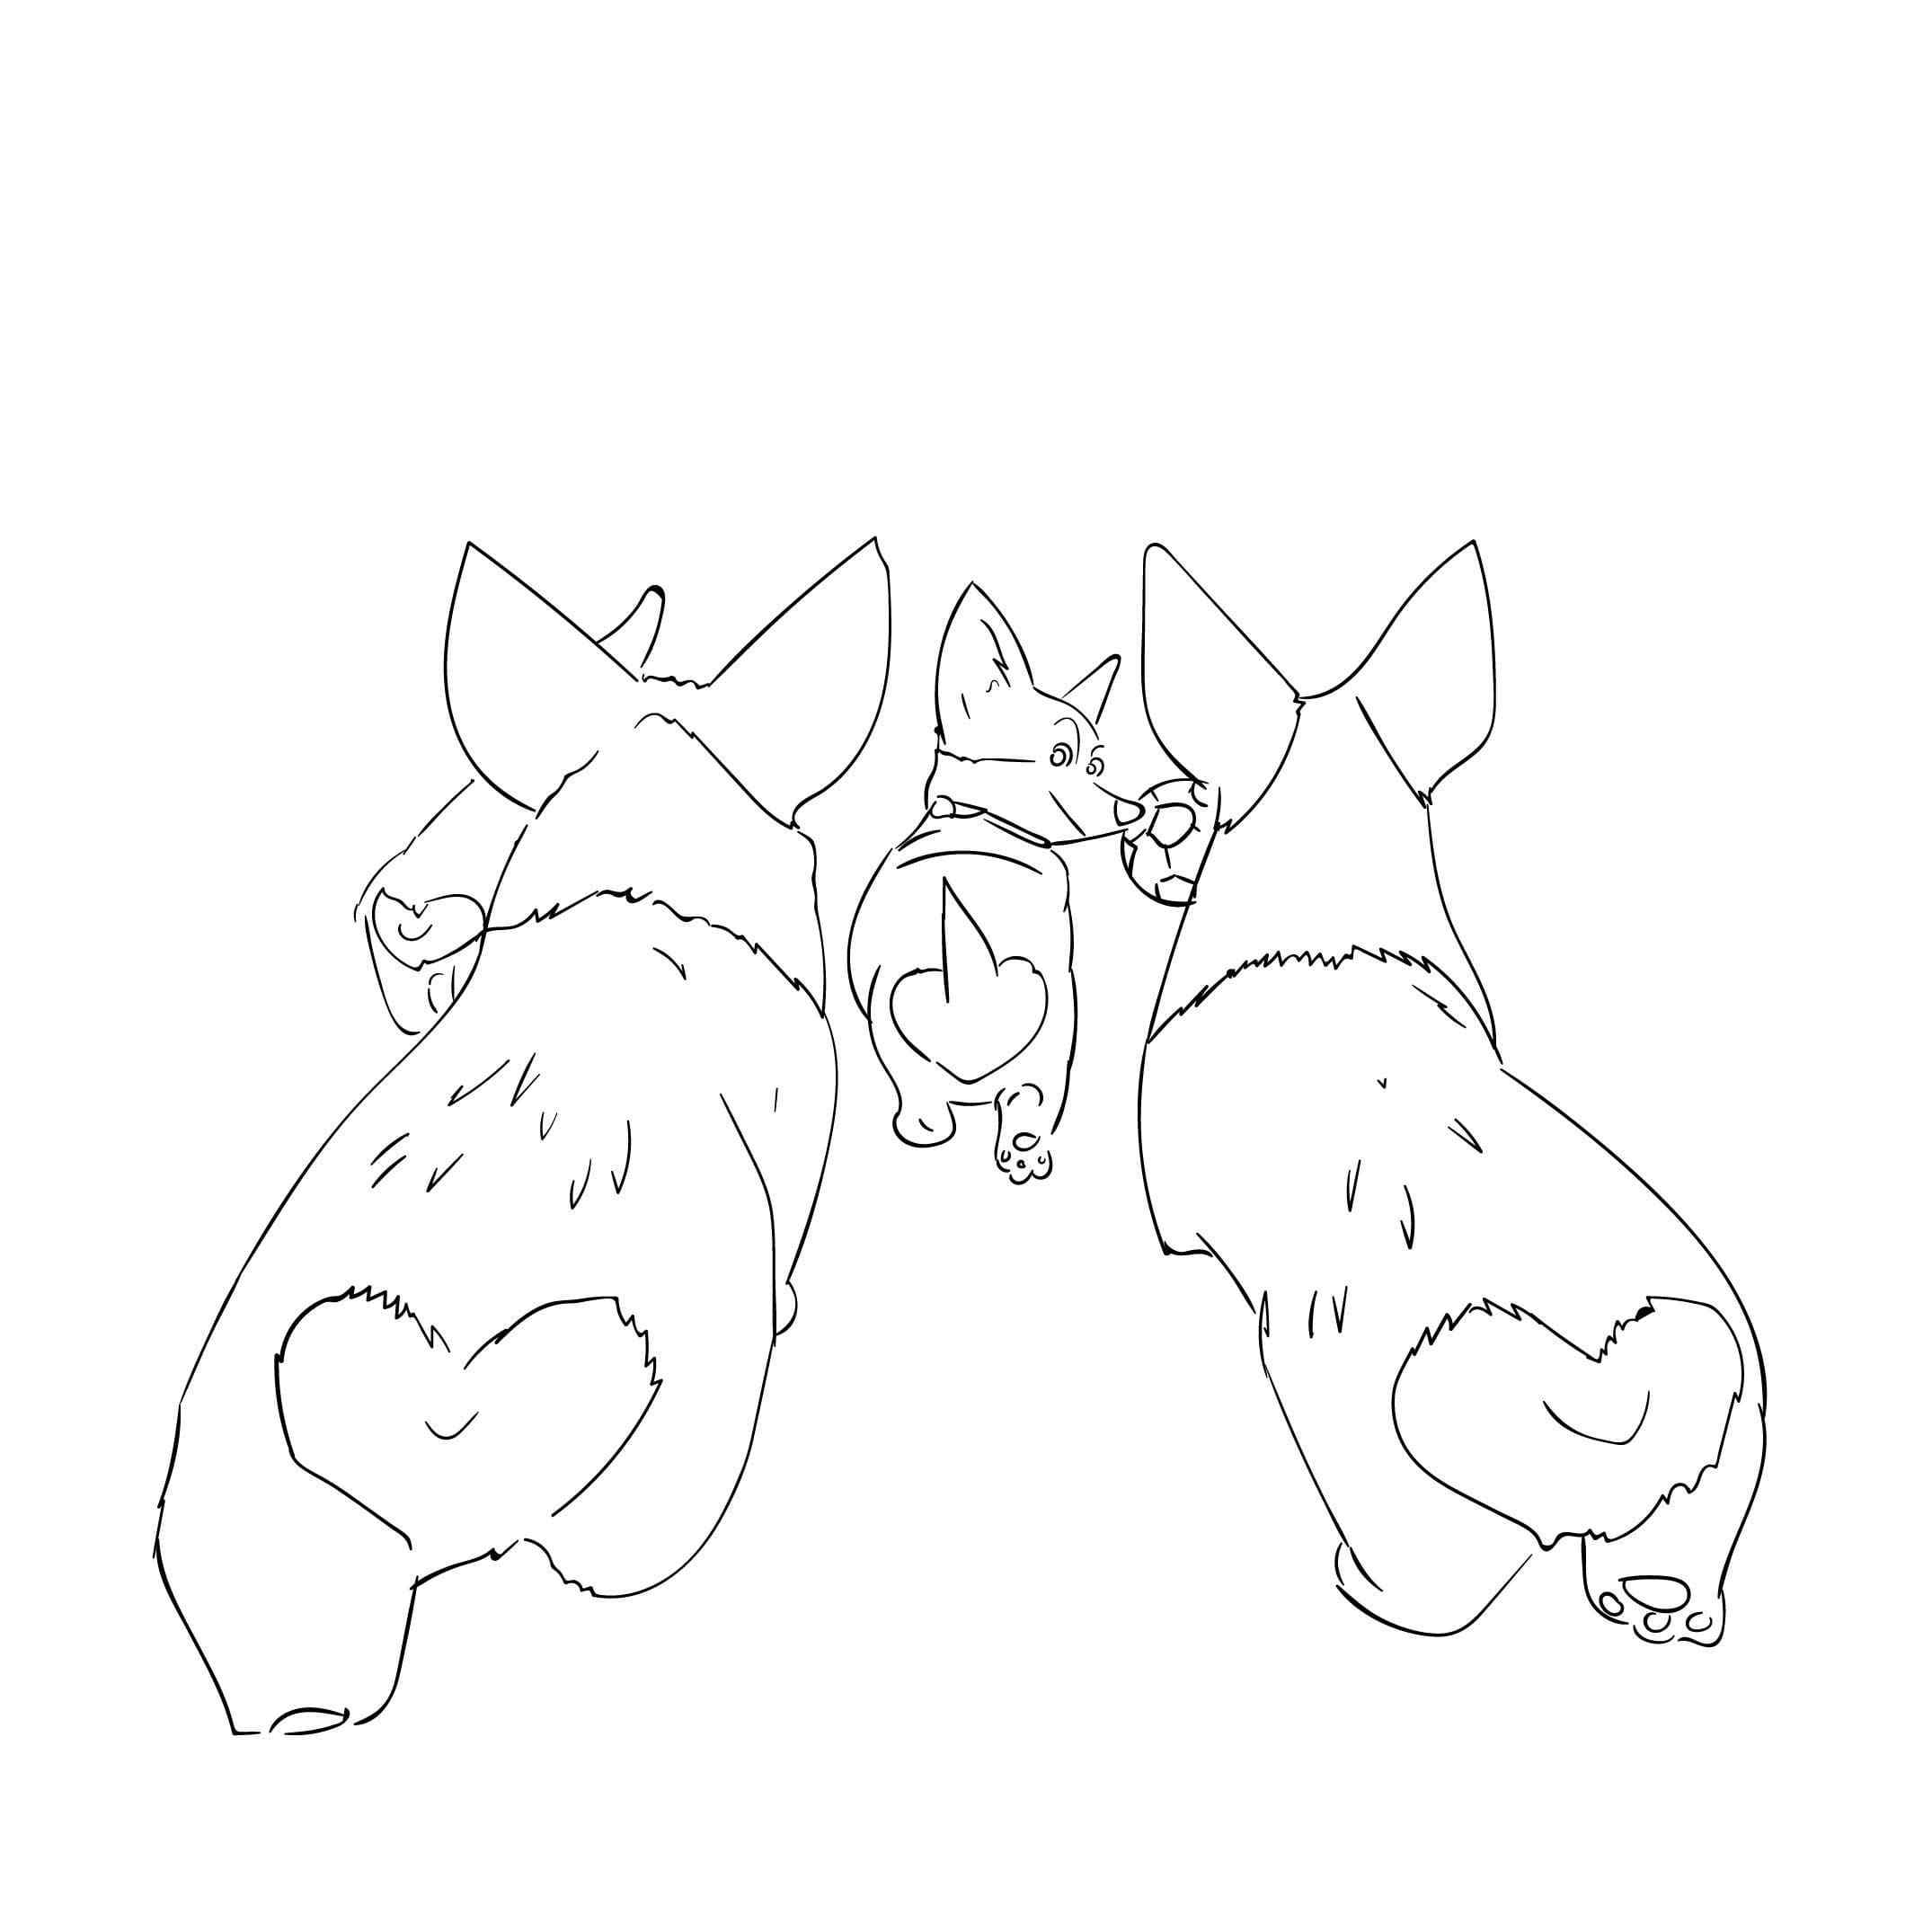 The Most Adorable Dog Breed Coloring Page